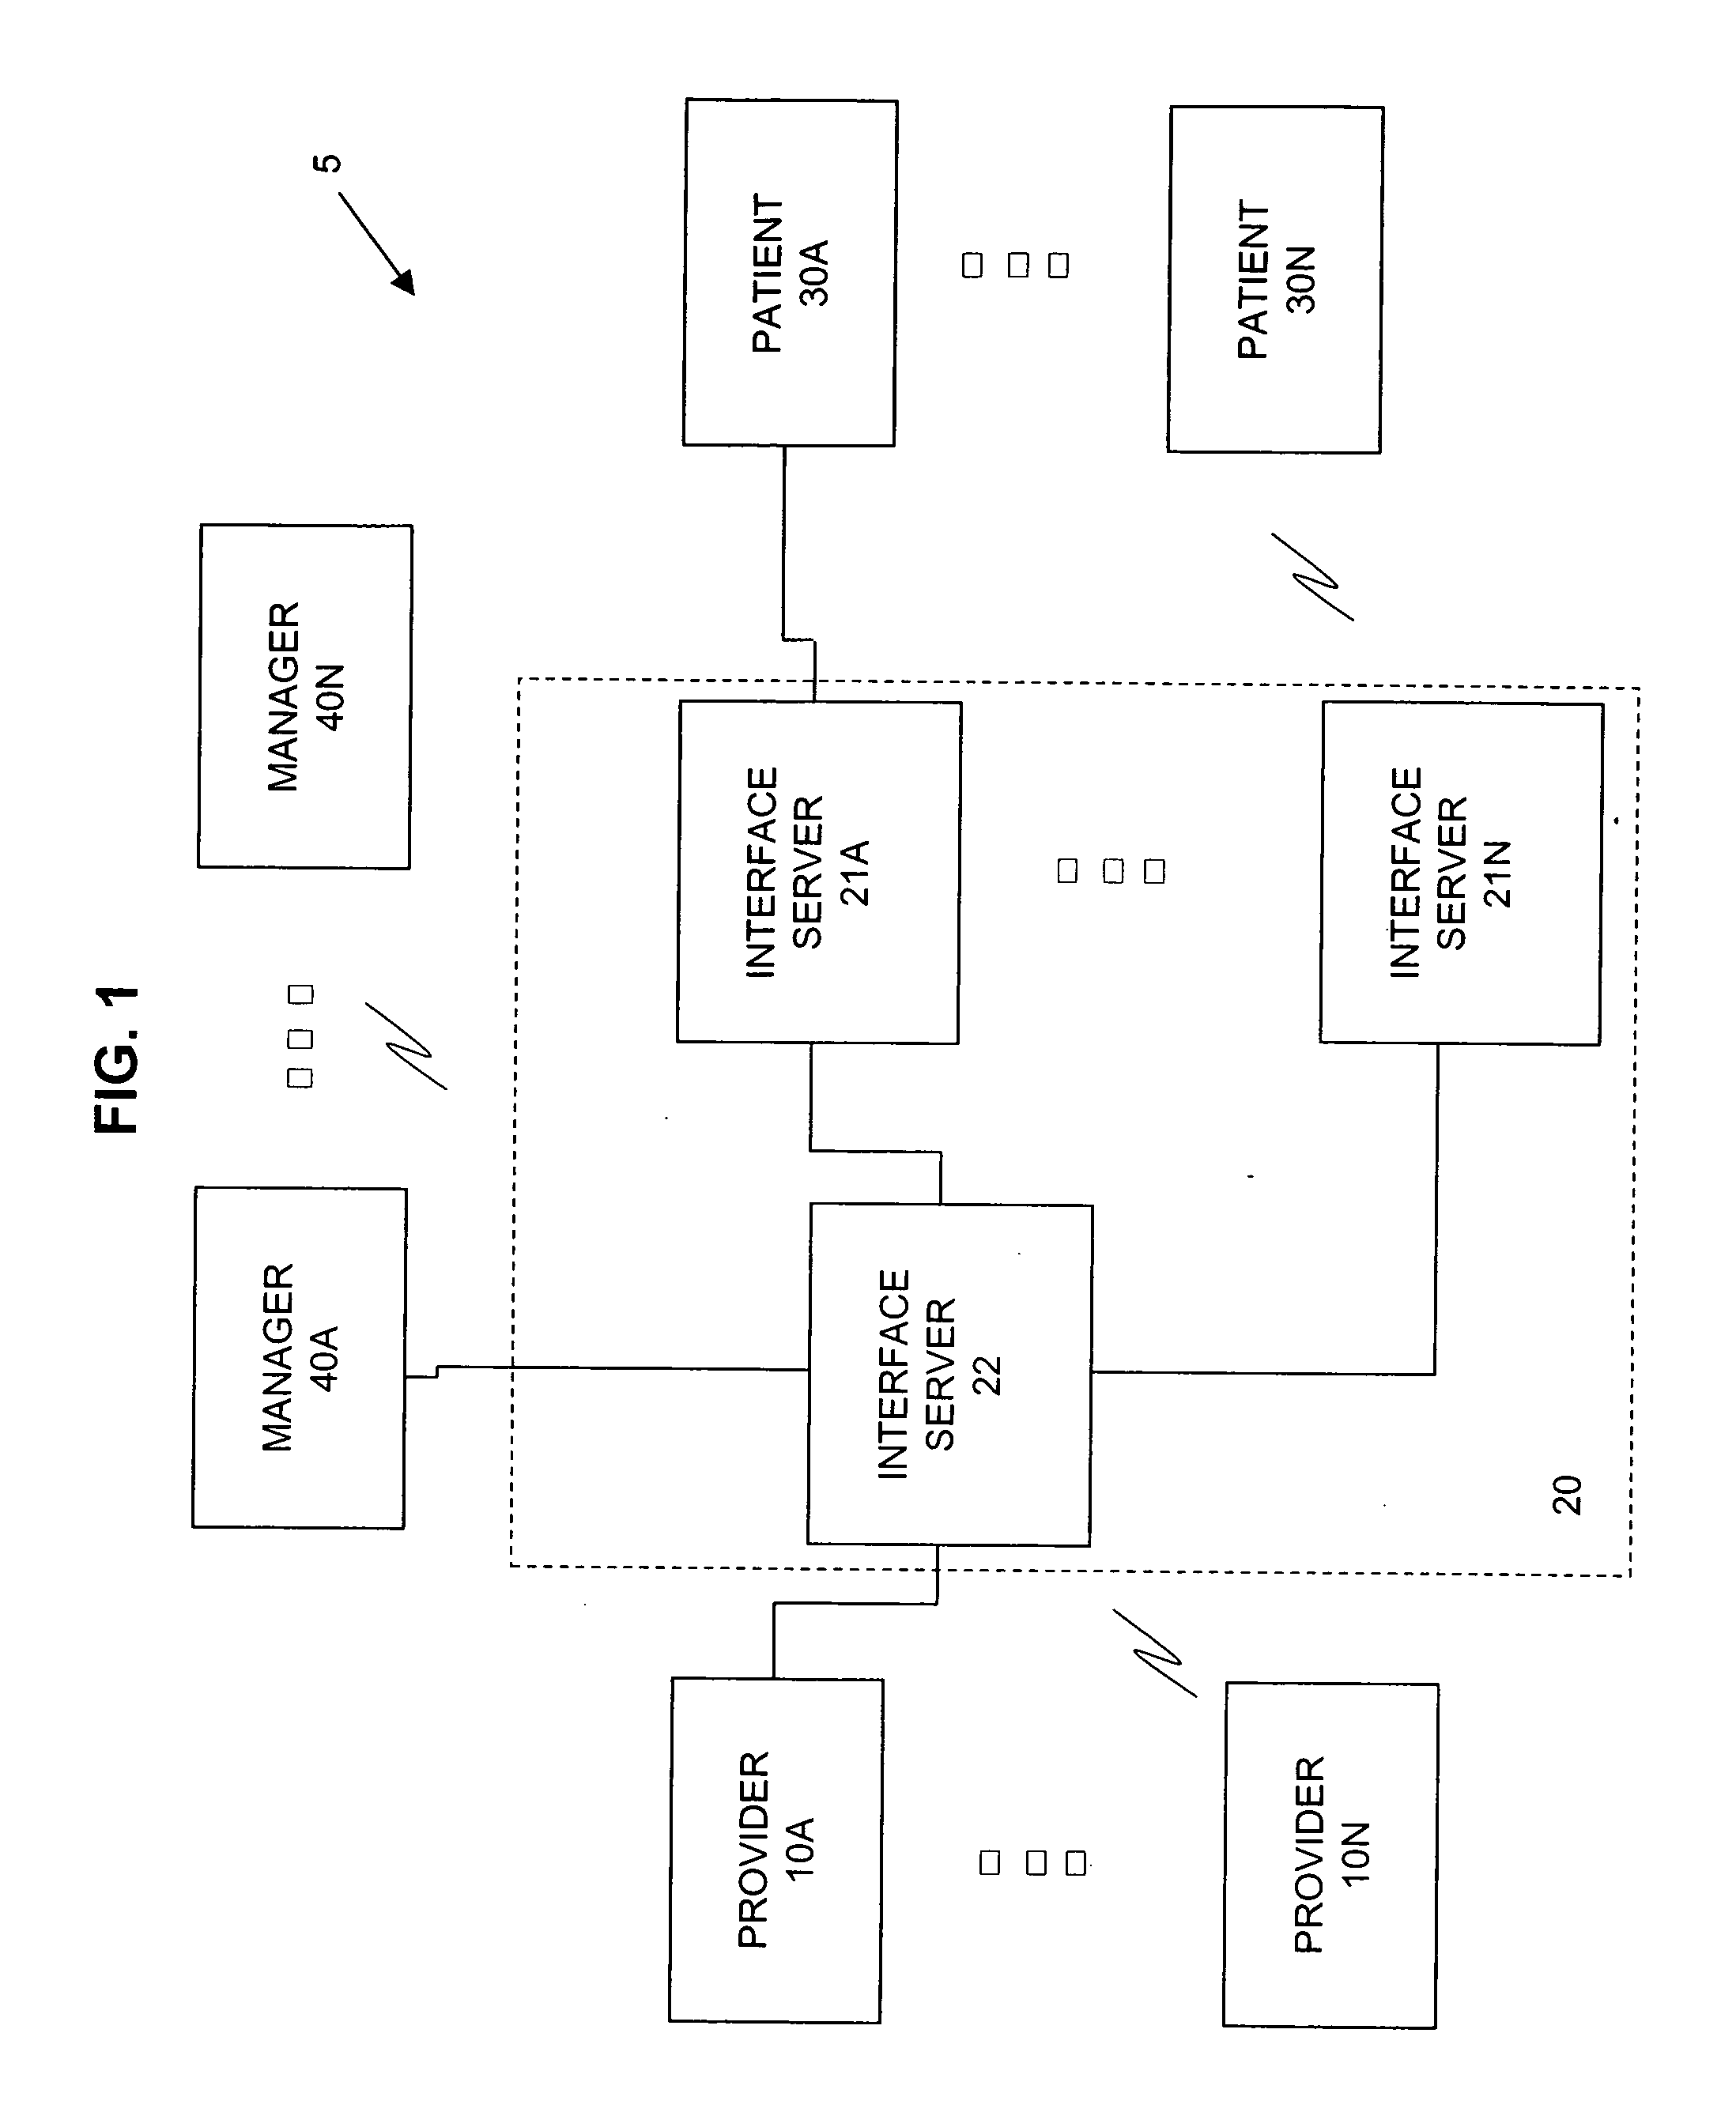 System for and method of managing schedule compliance and bidirectionally communicating in real time between a user and a manager